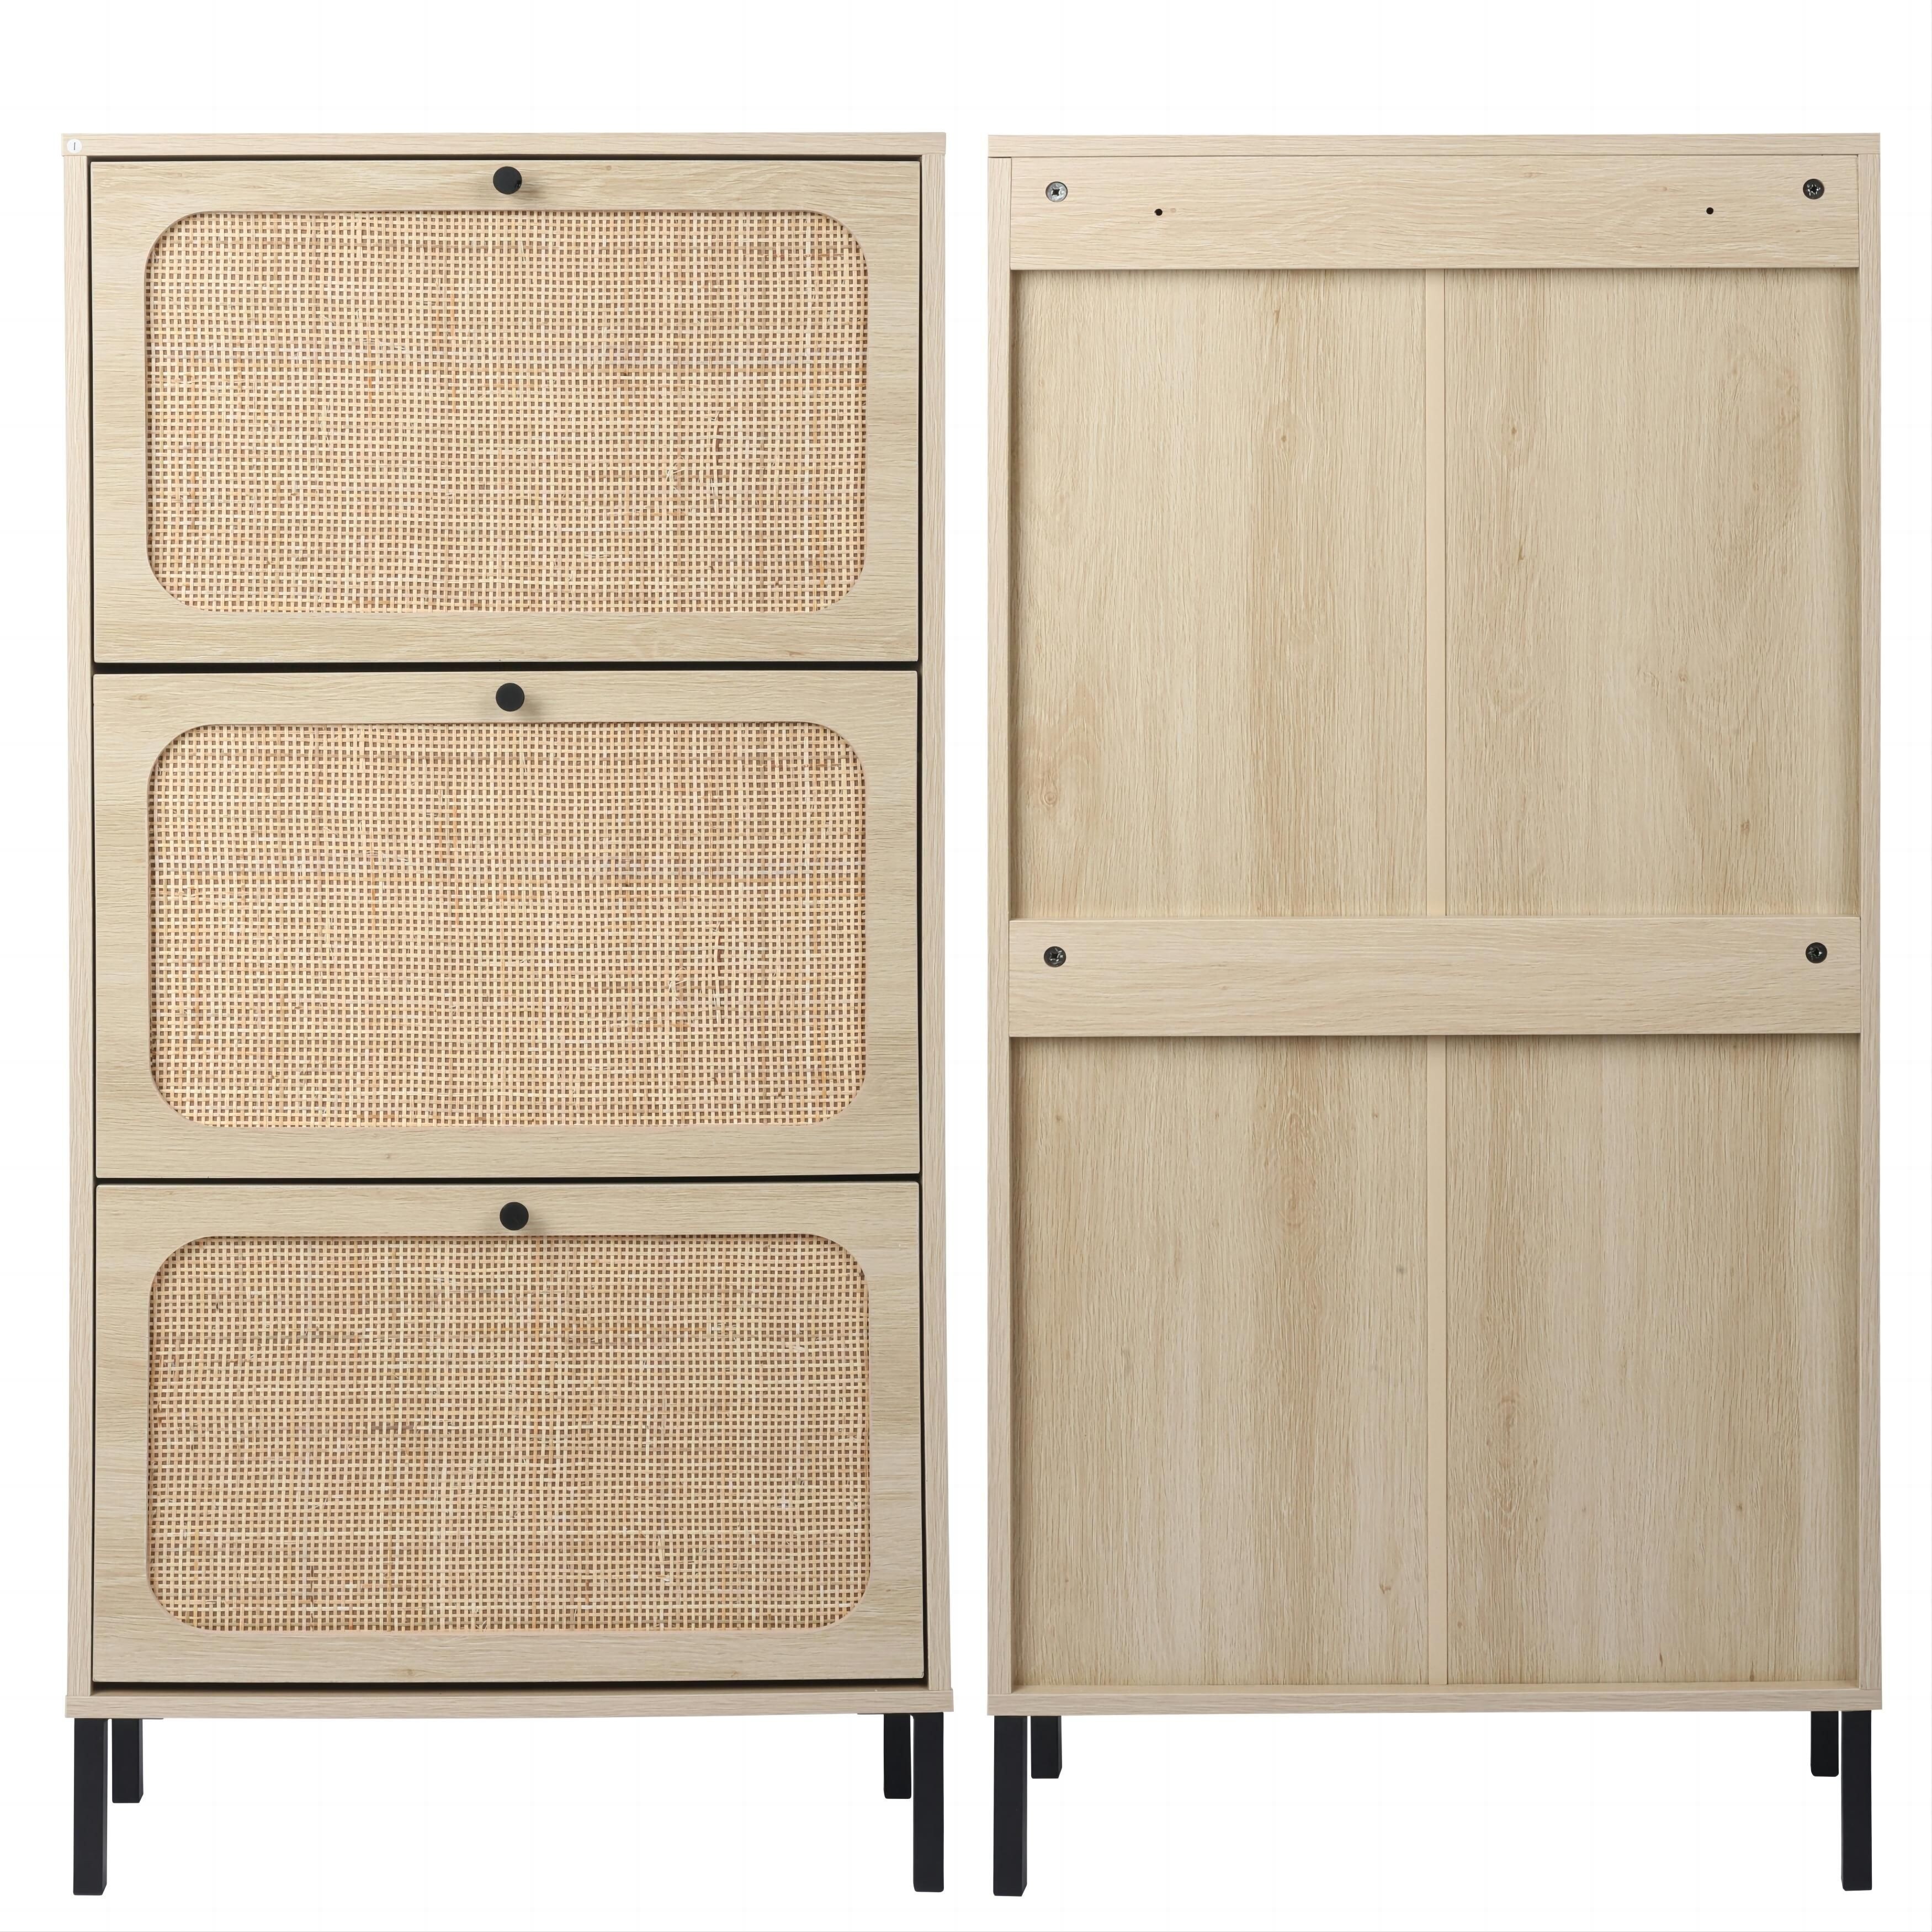 https://ak1.ostkcdn.com/images/products/is/images/direct/1e407099ff15f037eb32299e4f172c2bb74c2415/Freestanding-3-Flip-Drawers-Shoe-Rack-and-3-Door-Slim-Entryway-Shoe-Organizer-with-Half-Round-Woven-Rattan-Doors.jpg